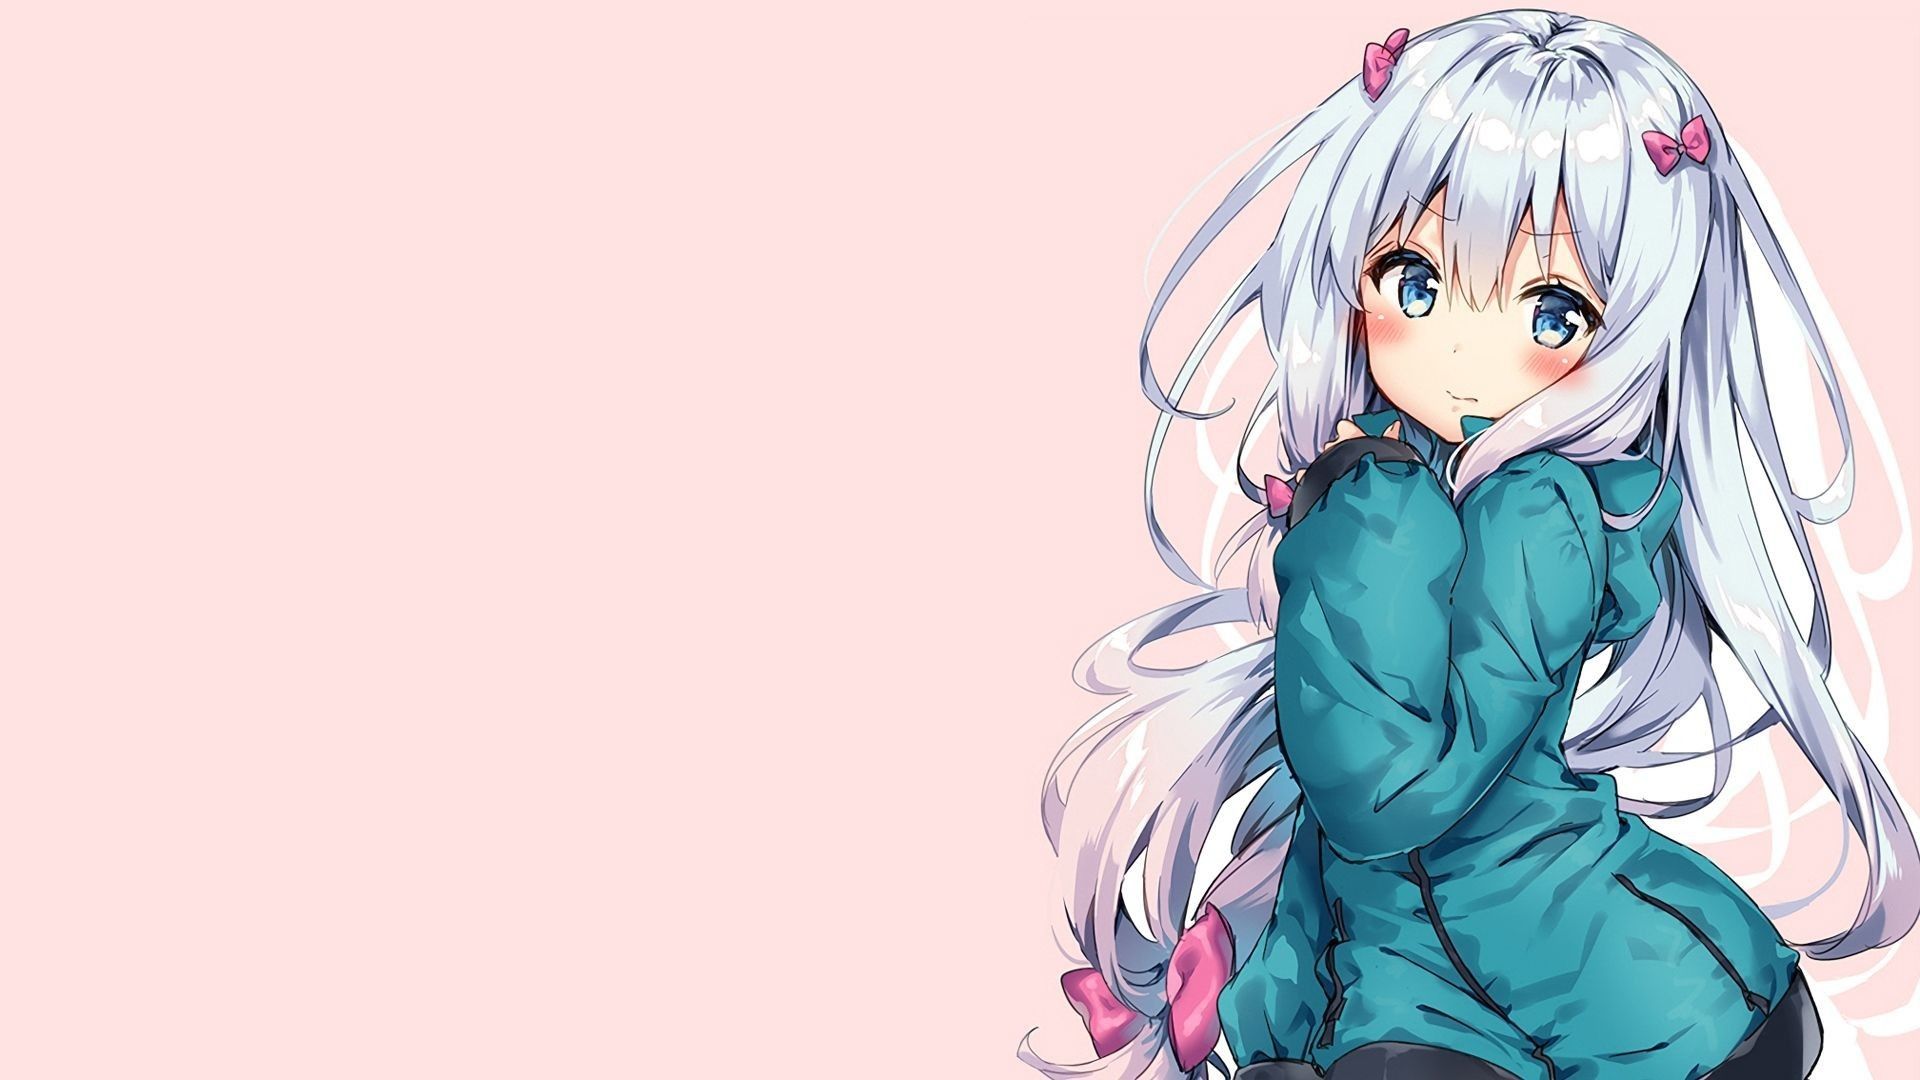 Anime wallpapers 4k ultra hd 16:10, desktop backgrounds hd, pictures and  images